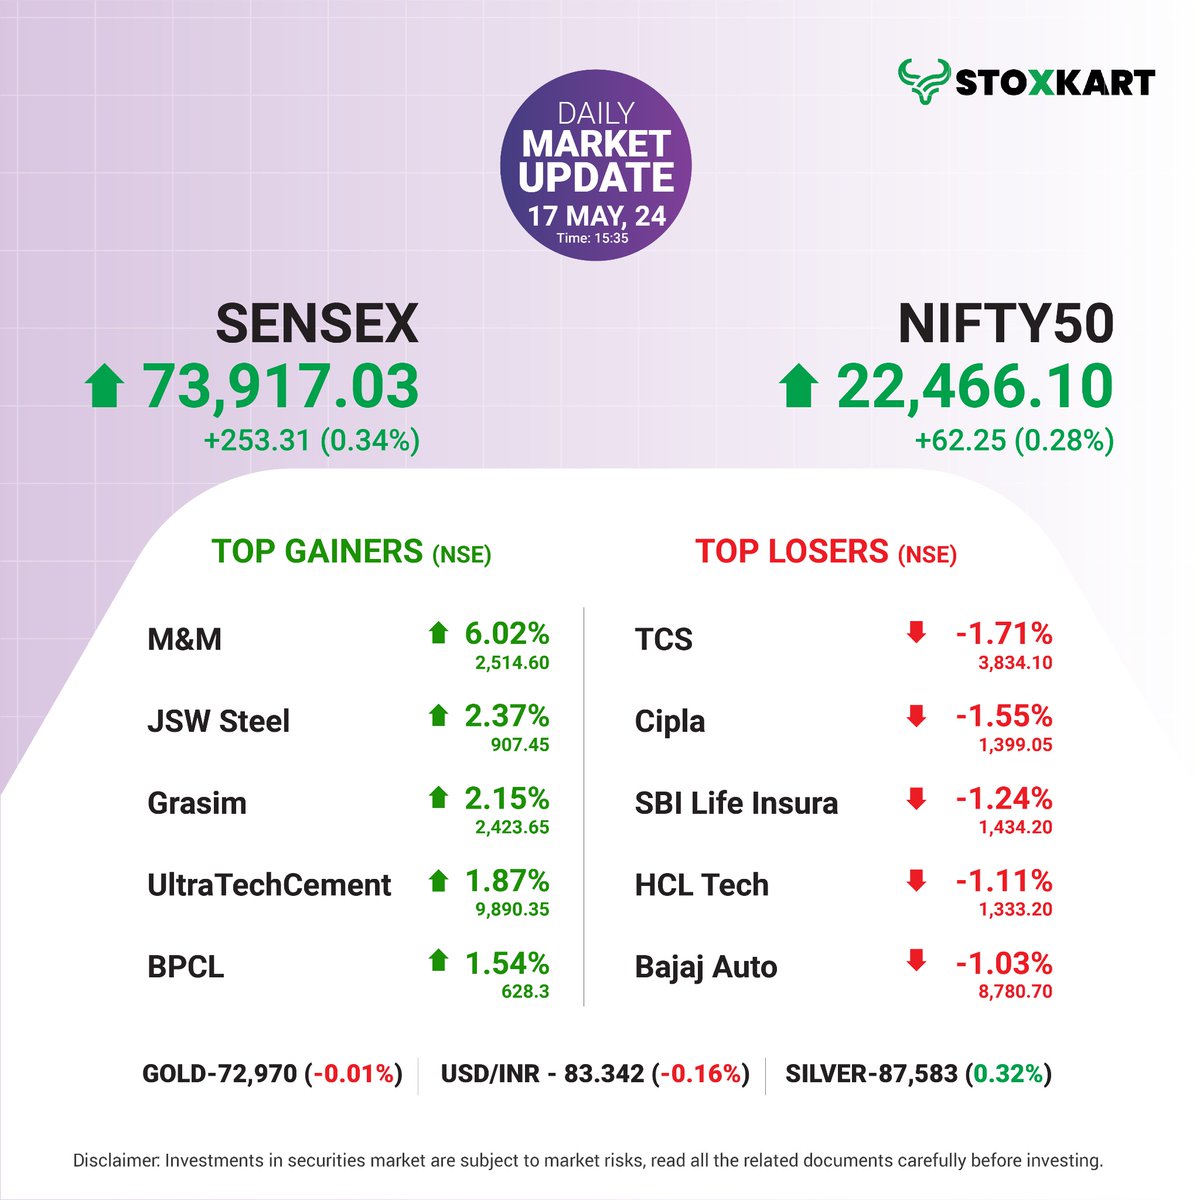 #dailymarketupdate
Here's today's market recap, highlighting the top 5 gainers and top 5 losers from the Nifty 50 index. Have you invested in any of these? Share your thoughts in the comments below!

#stoxkart #stoxkartapp #tradewithstoxkart #investwithstoxkart